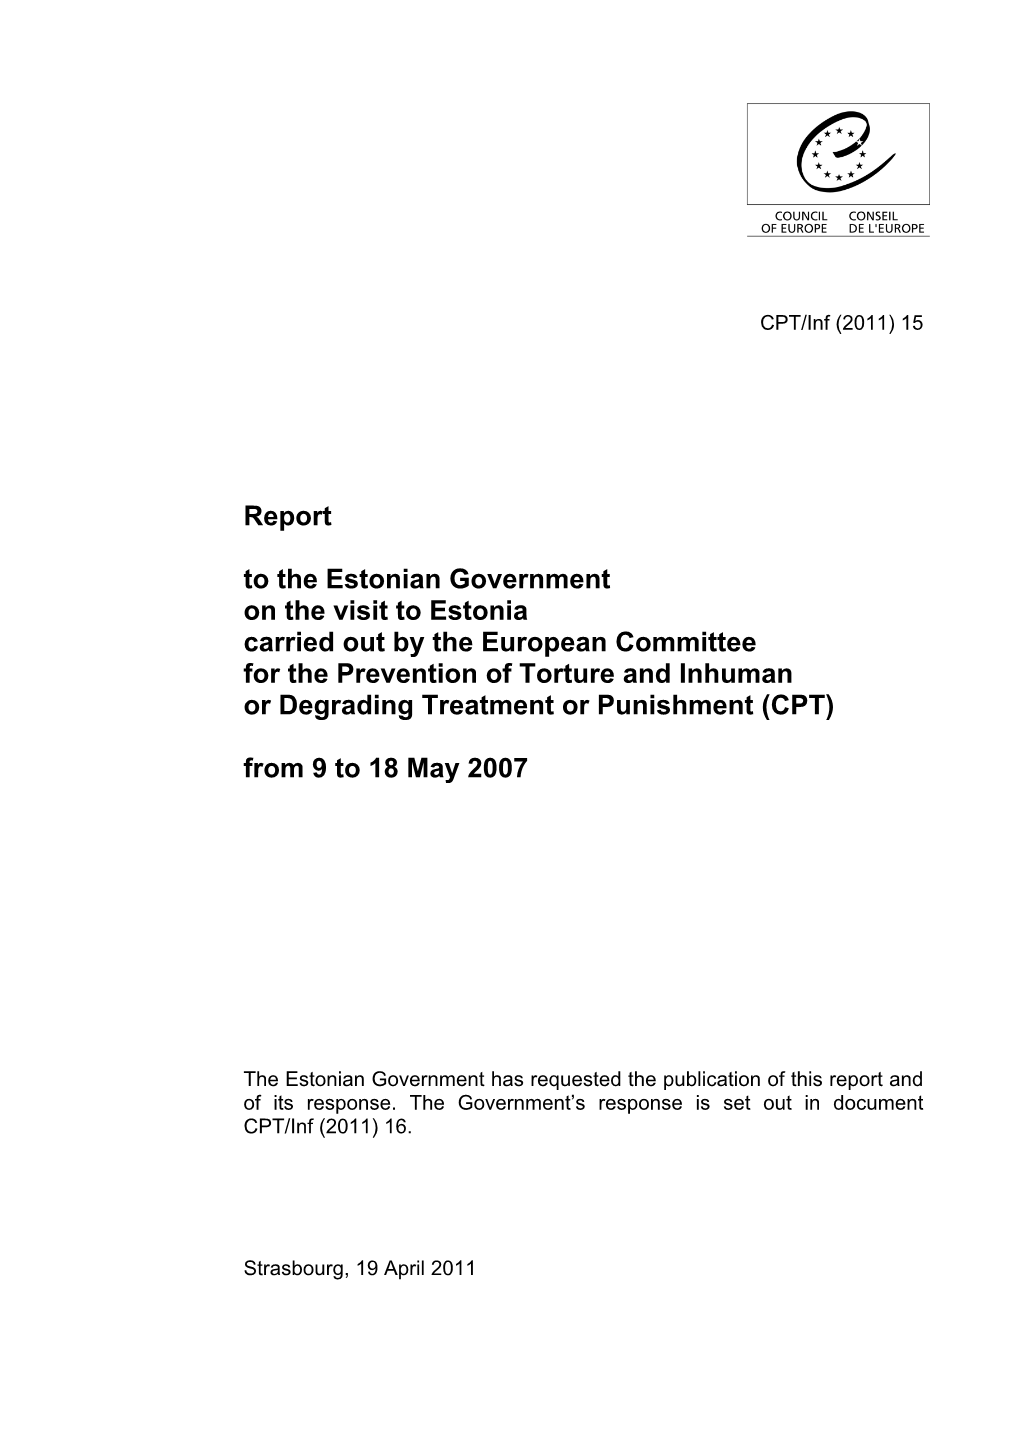 Report to the Estonian Government on the Visit to Estonia Carried out By